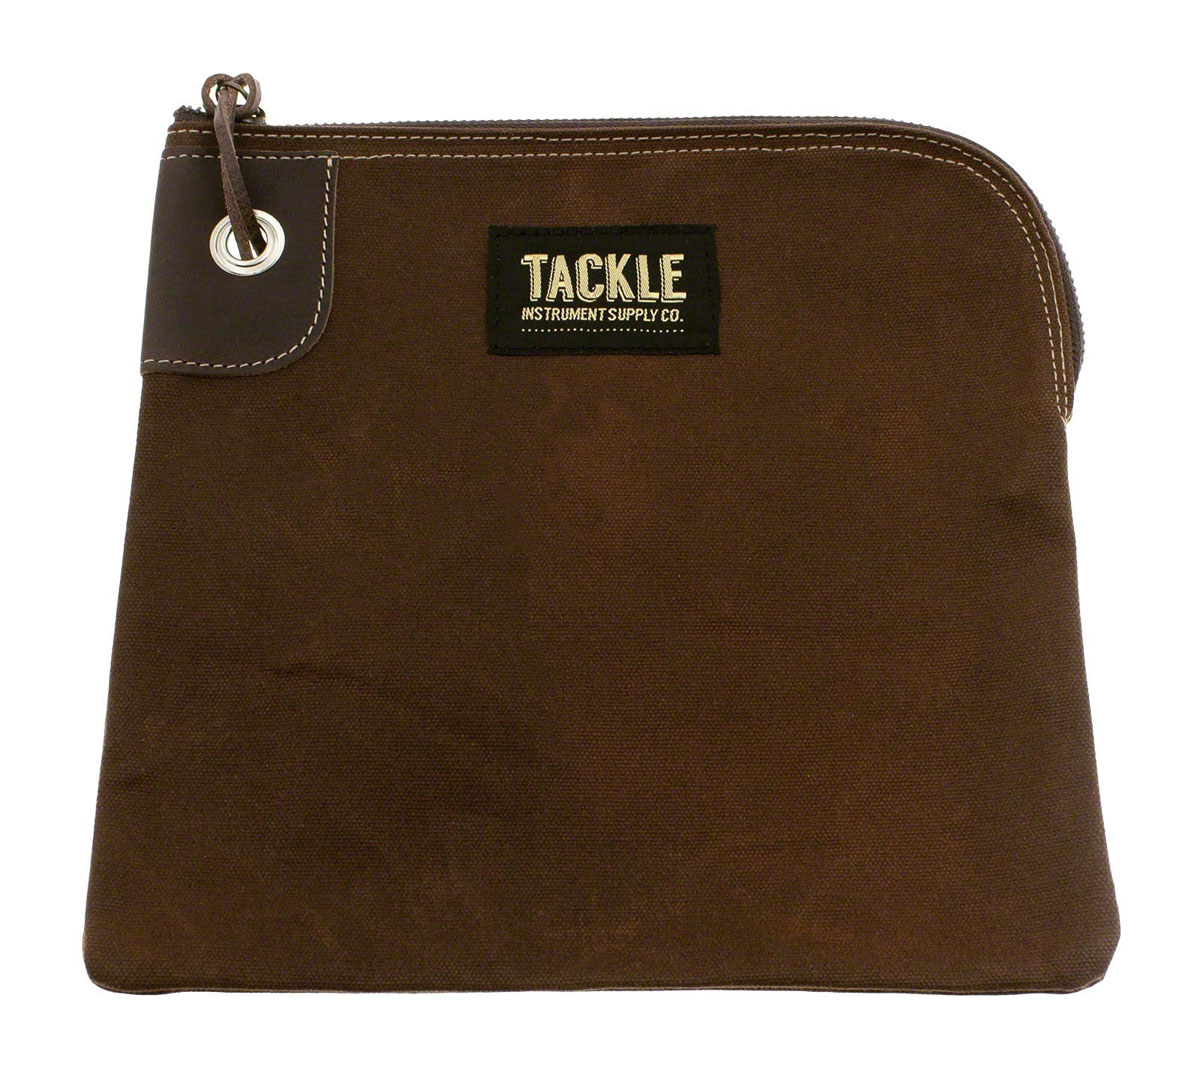 TACKLE INSTRUMENTS ACCESSORIES BAG - BROWN